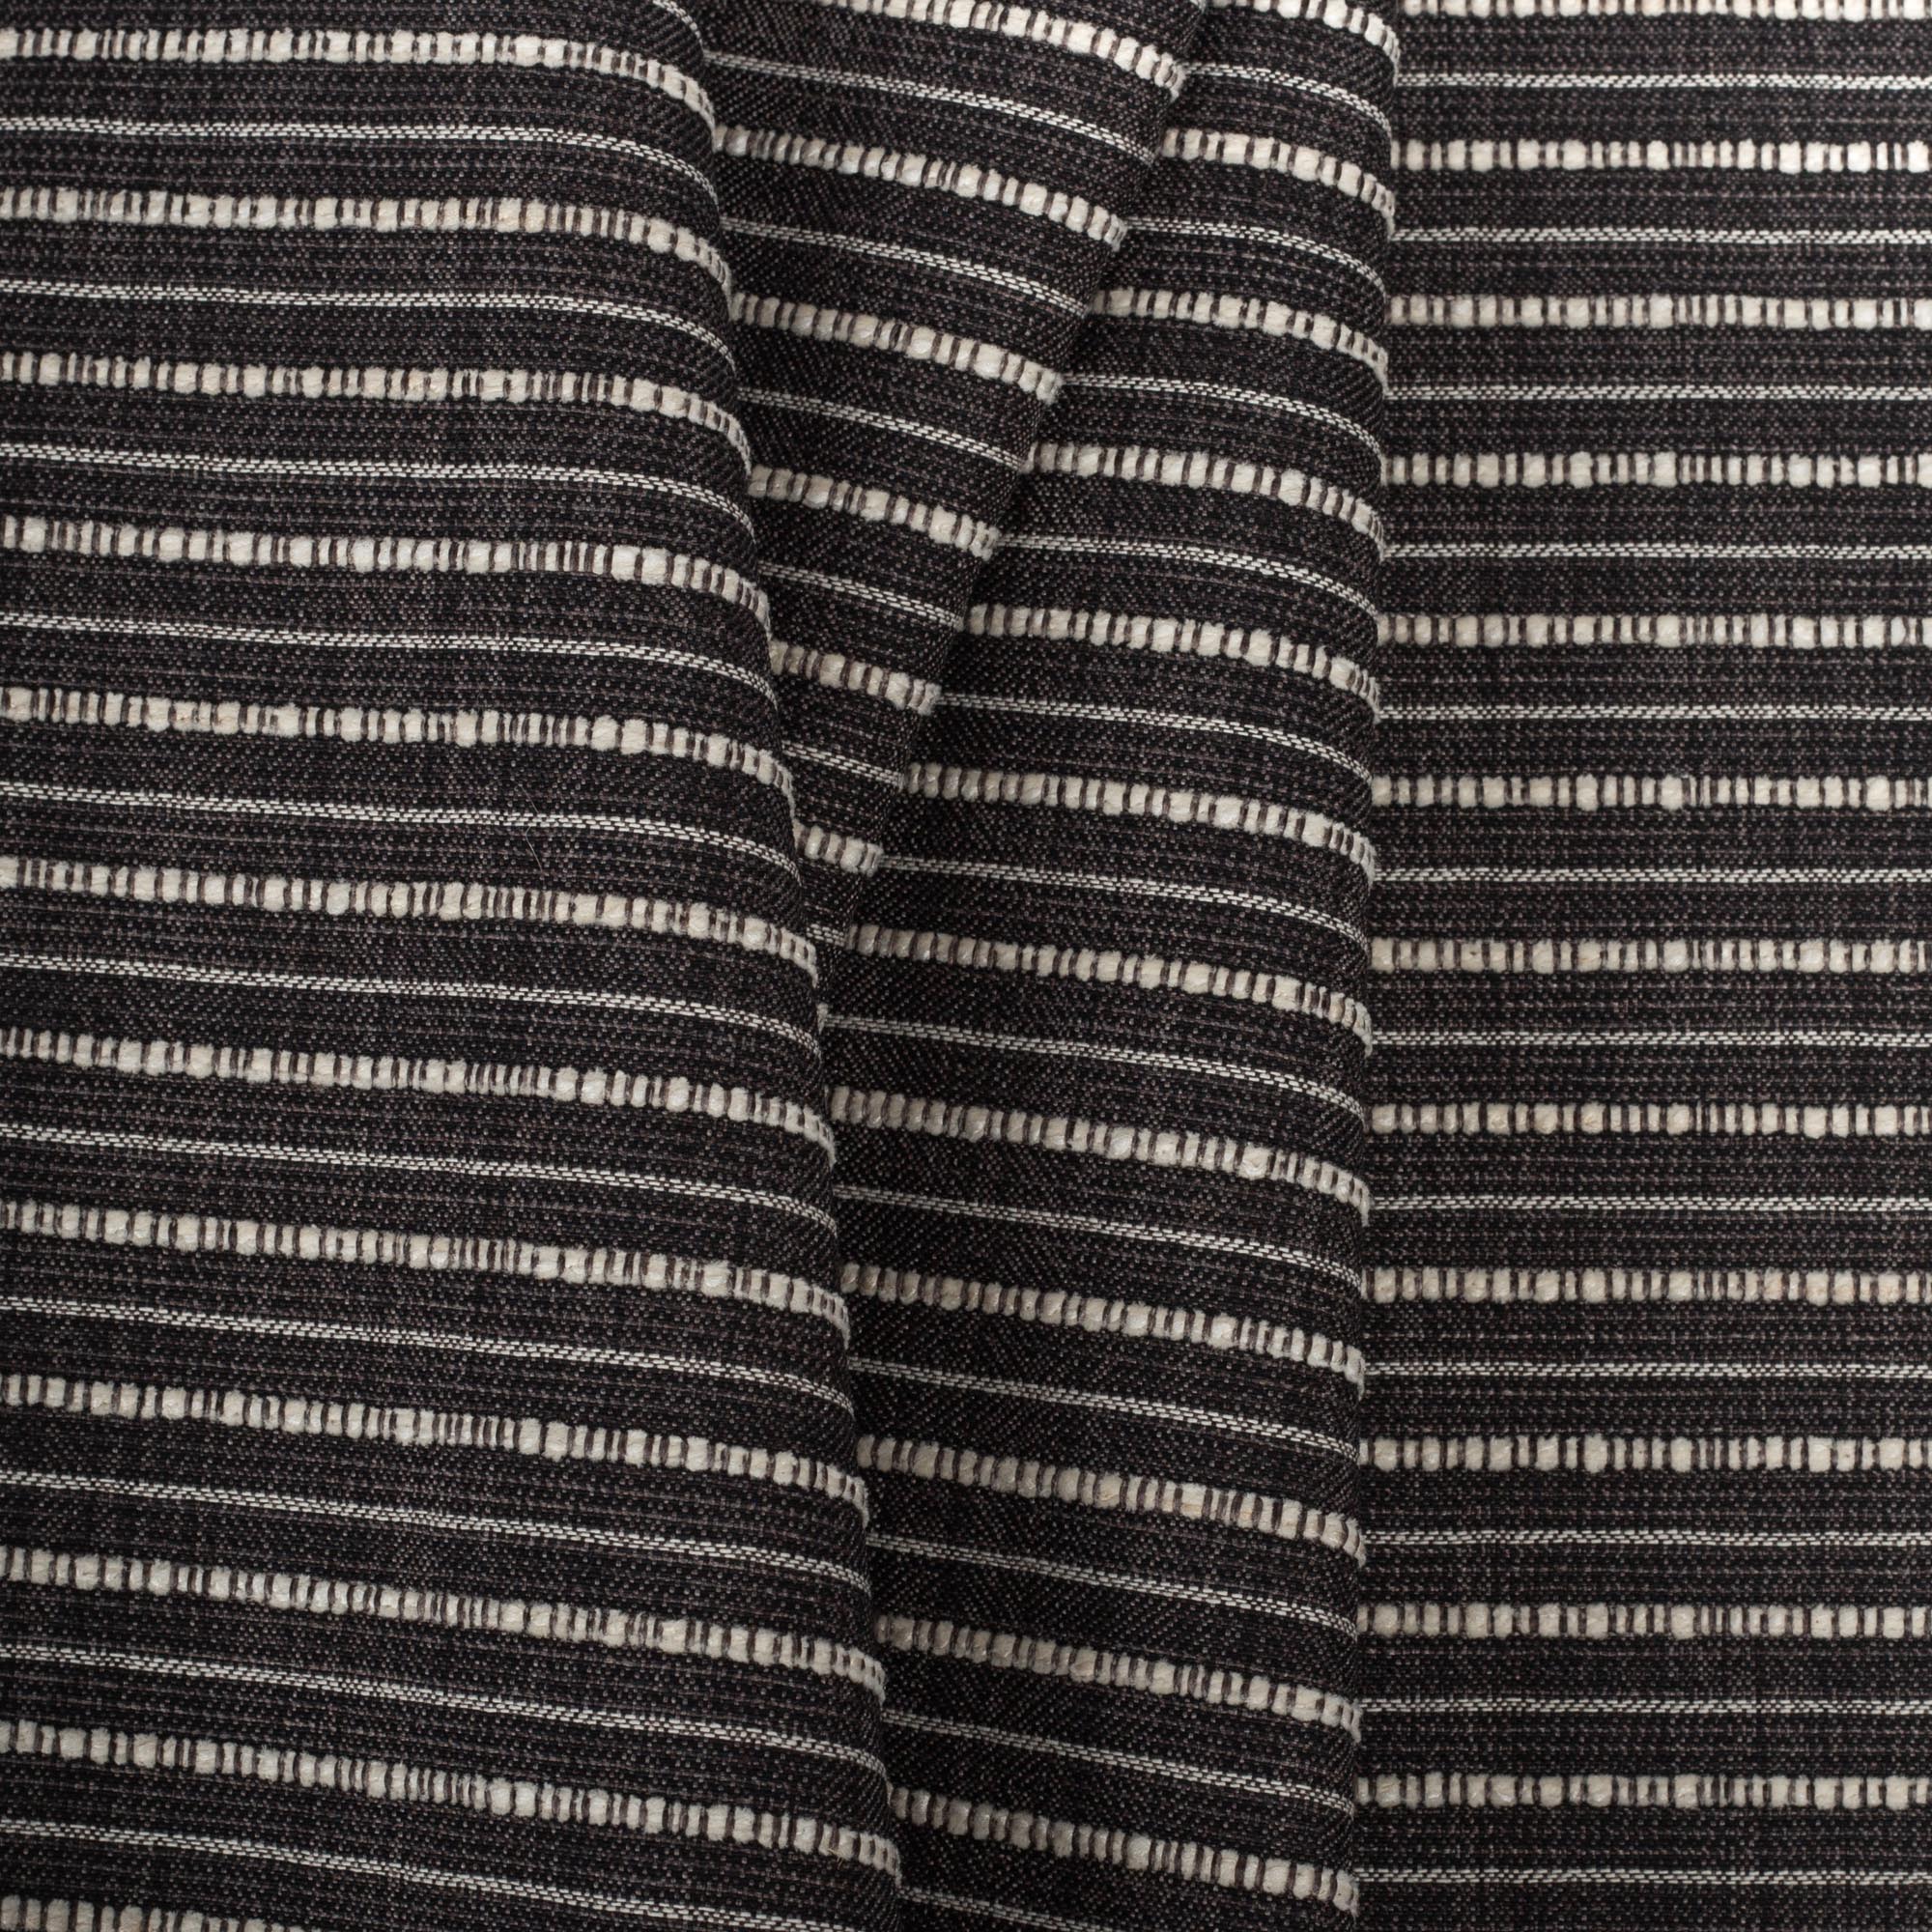 Misto Stripe Charcoal, a faded black and cream horizontal striped Crypton home performance fabric from Tonic Living 